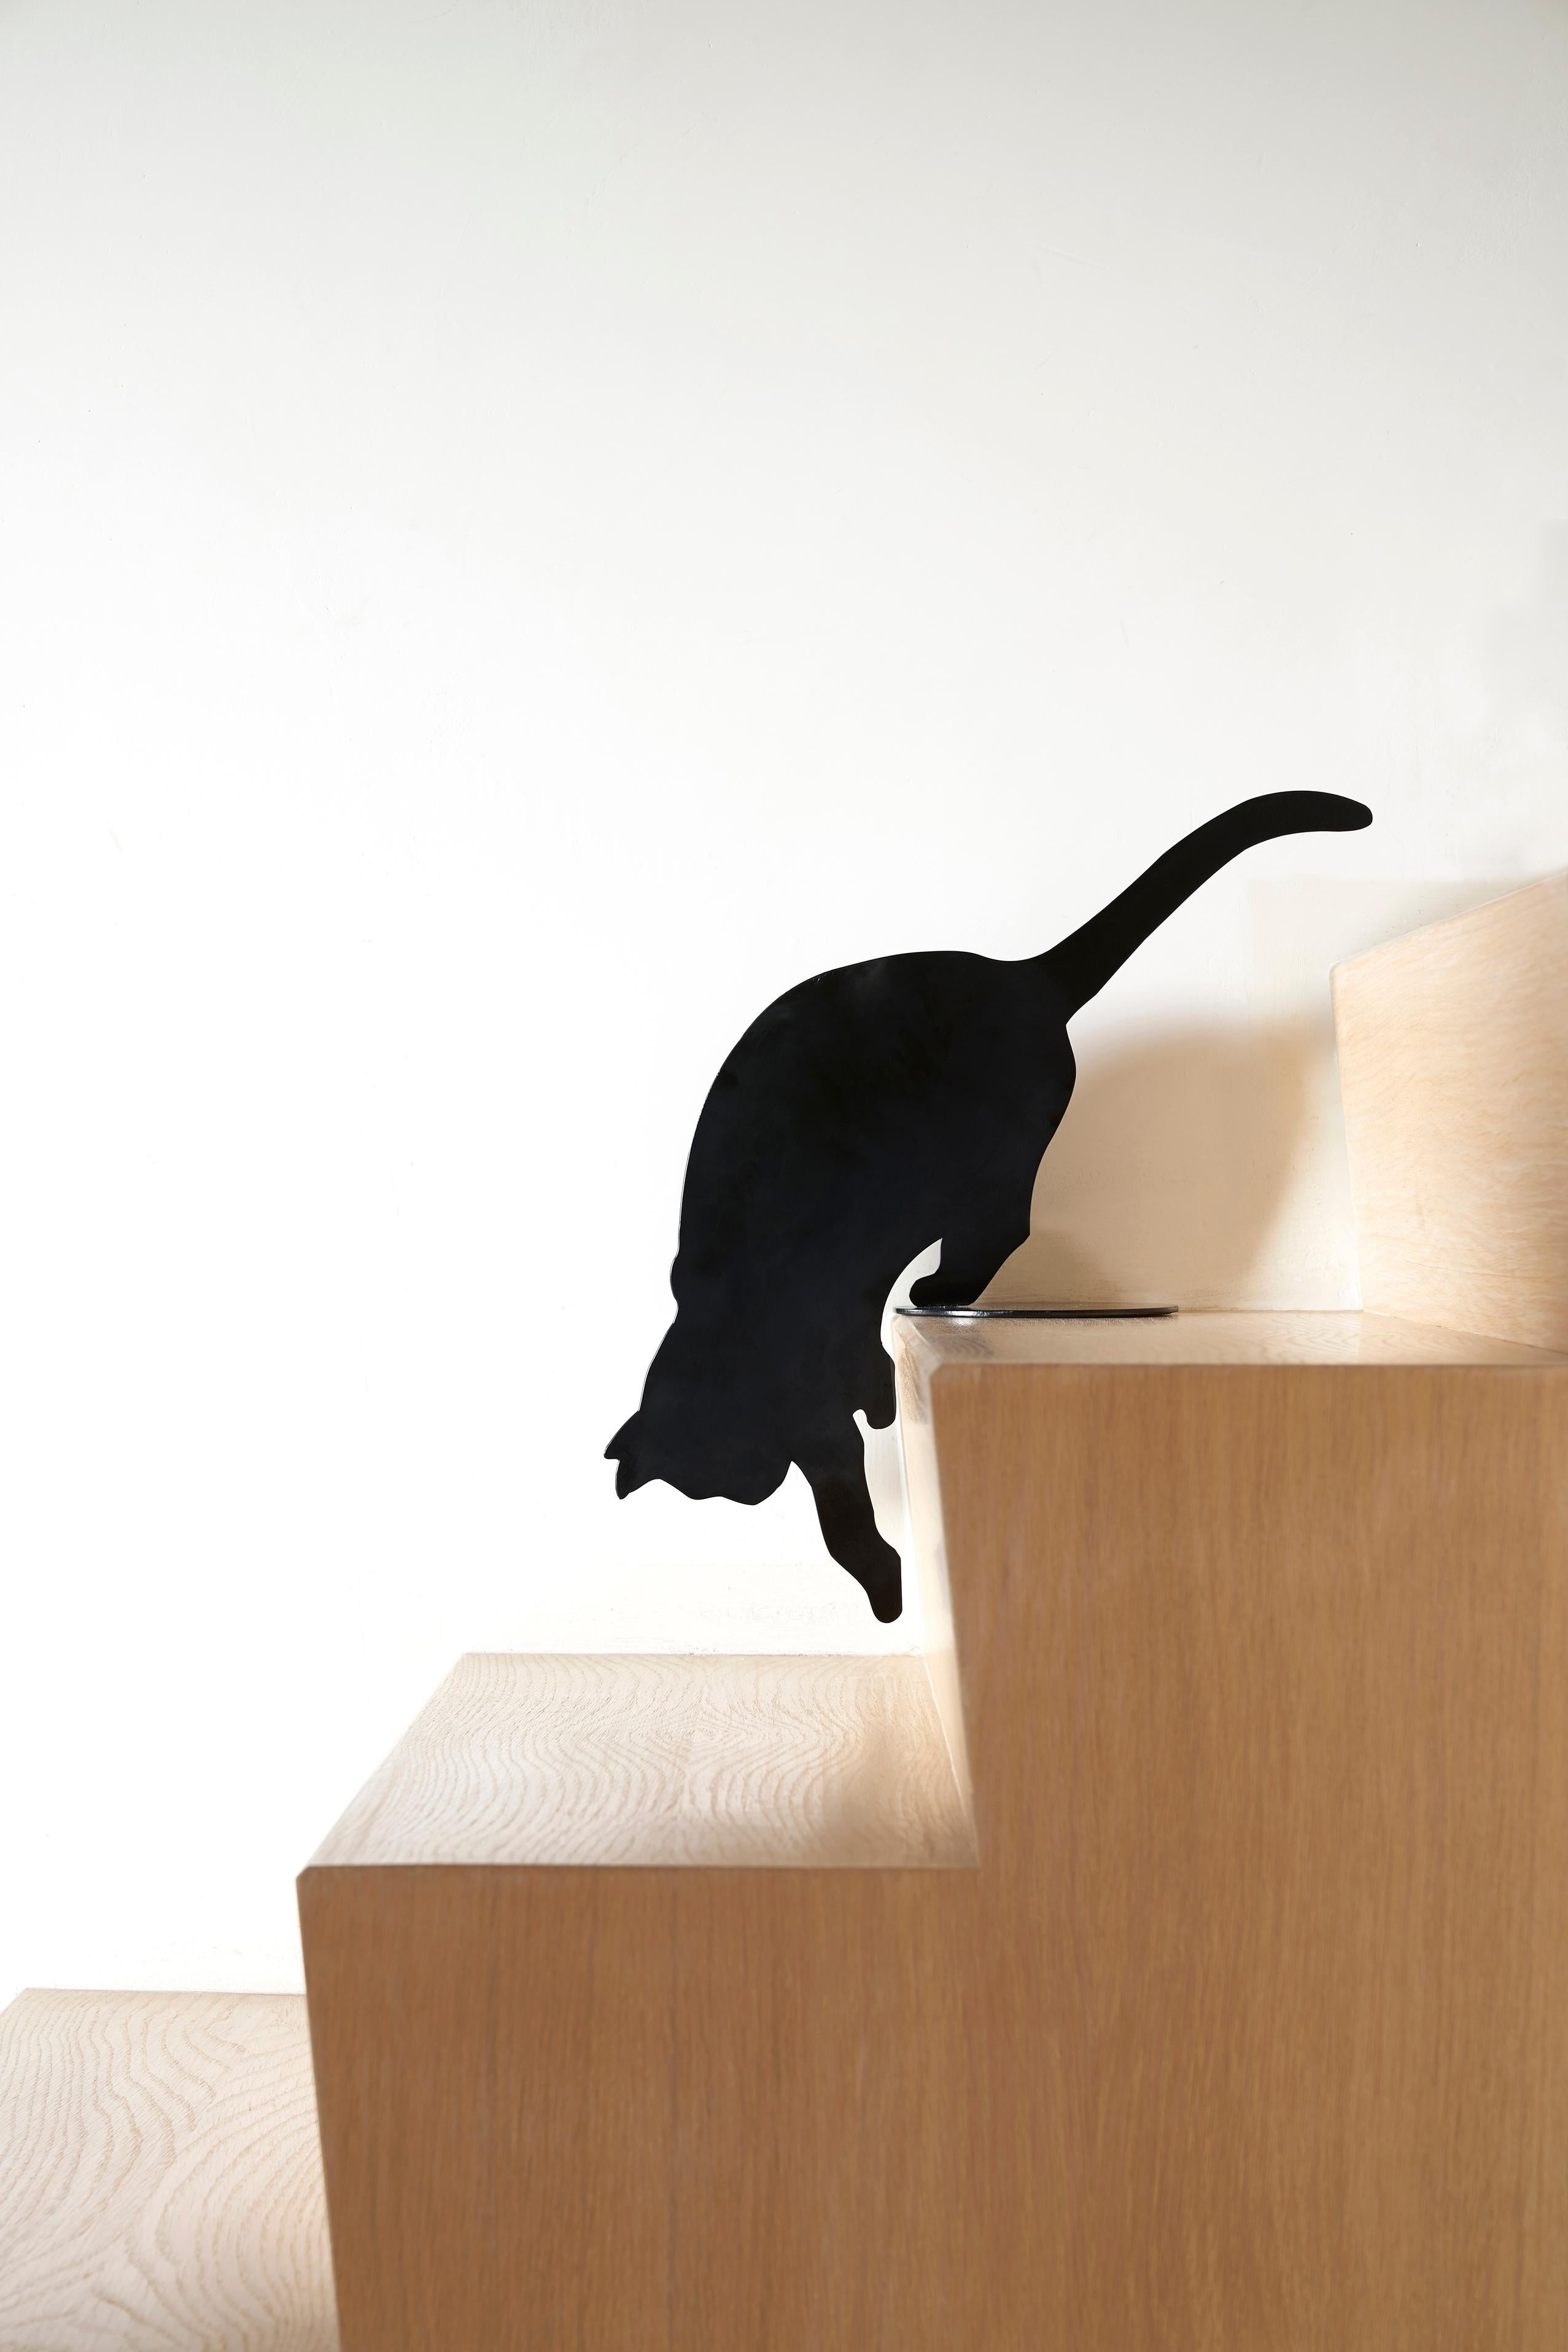 Ombres de Chats by Angelo Barcella are poetic objects, delicate table sculptures. Shadows of curious, busy, sore, angry or bored cats, instants which are made eternal when transformed into some very special steel furnishing accessory. The Ombres de